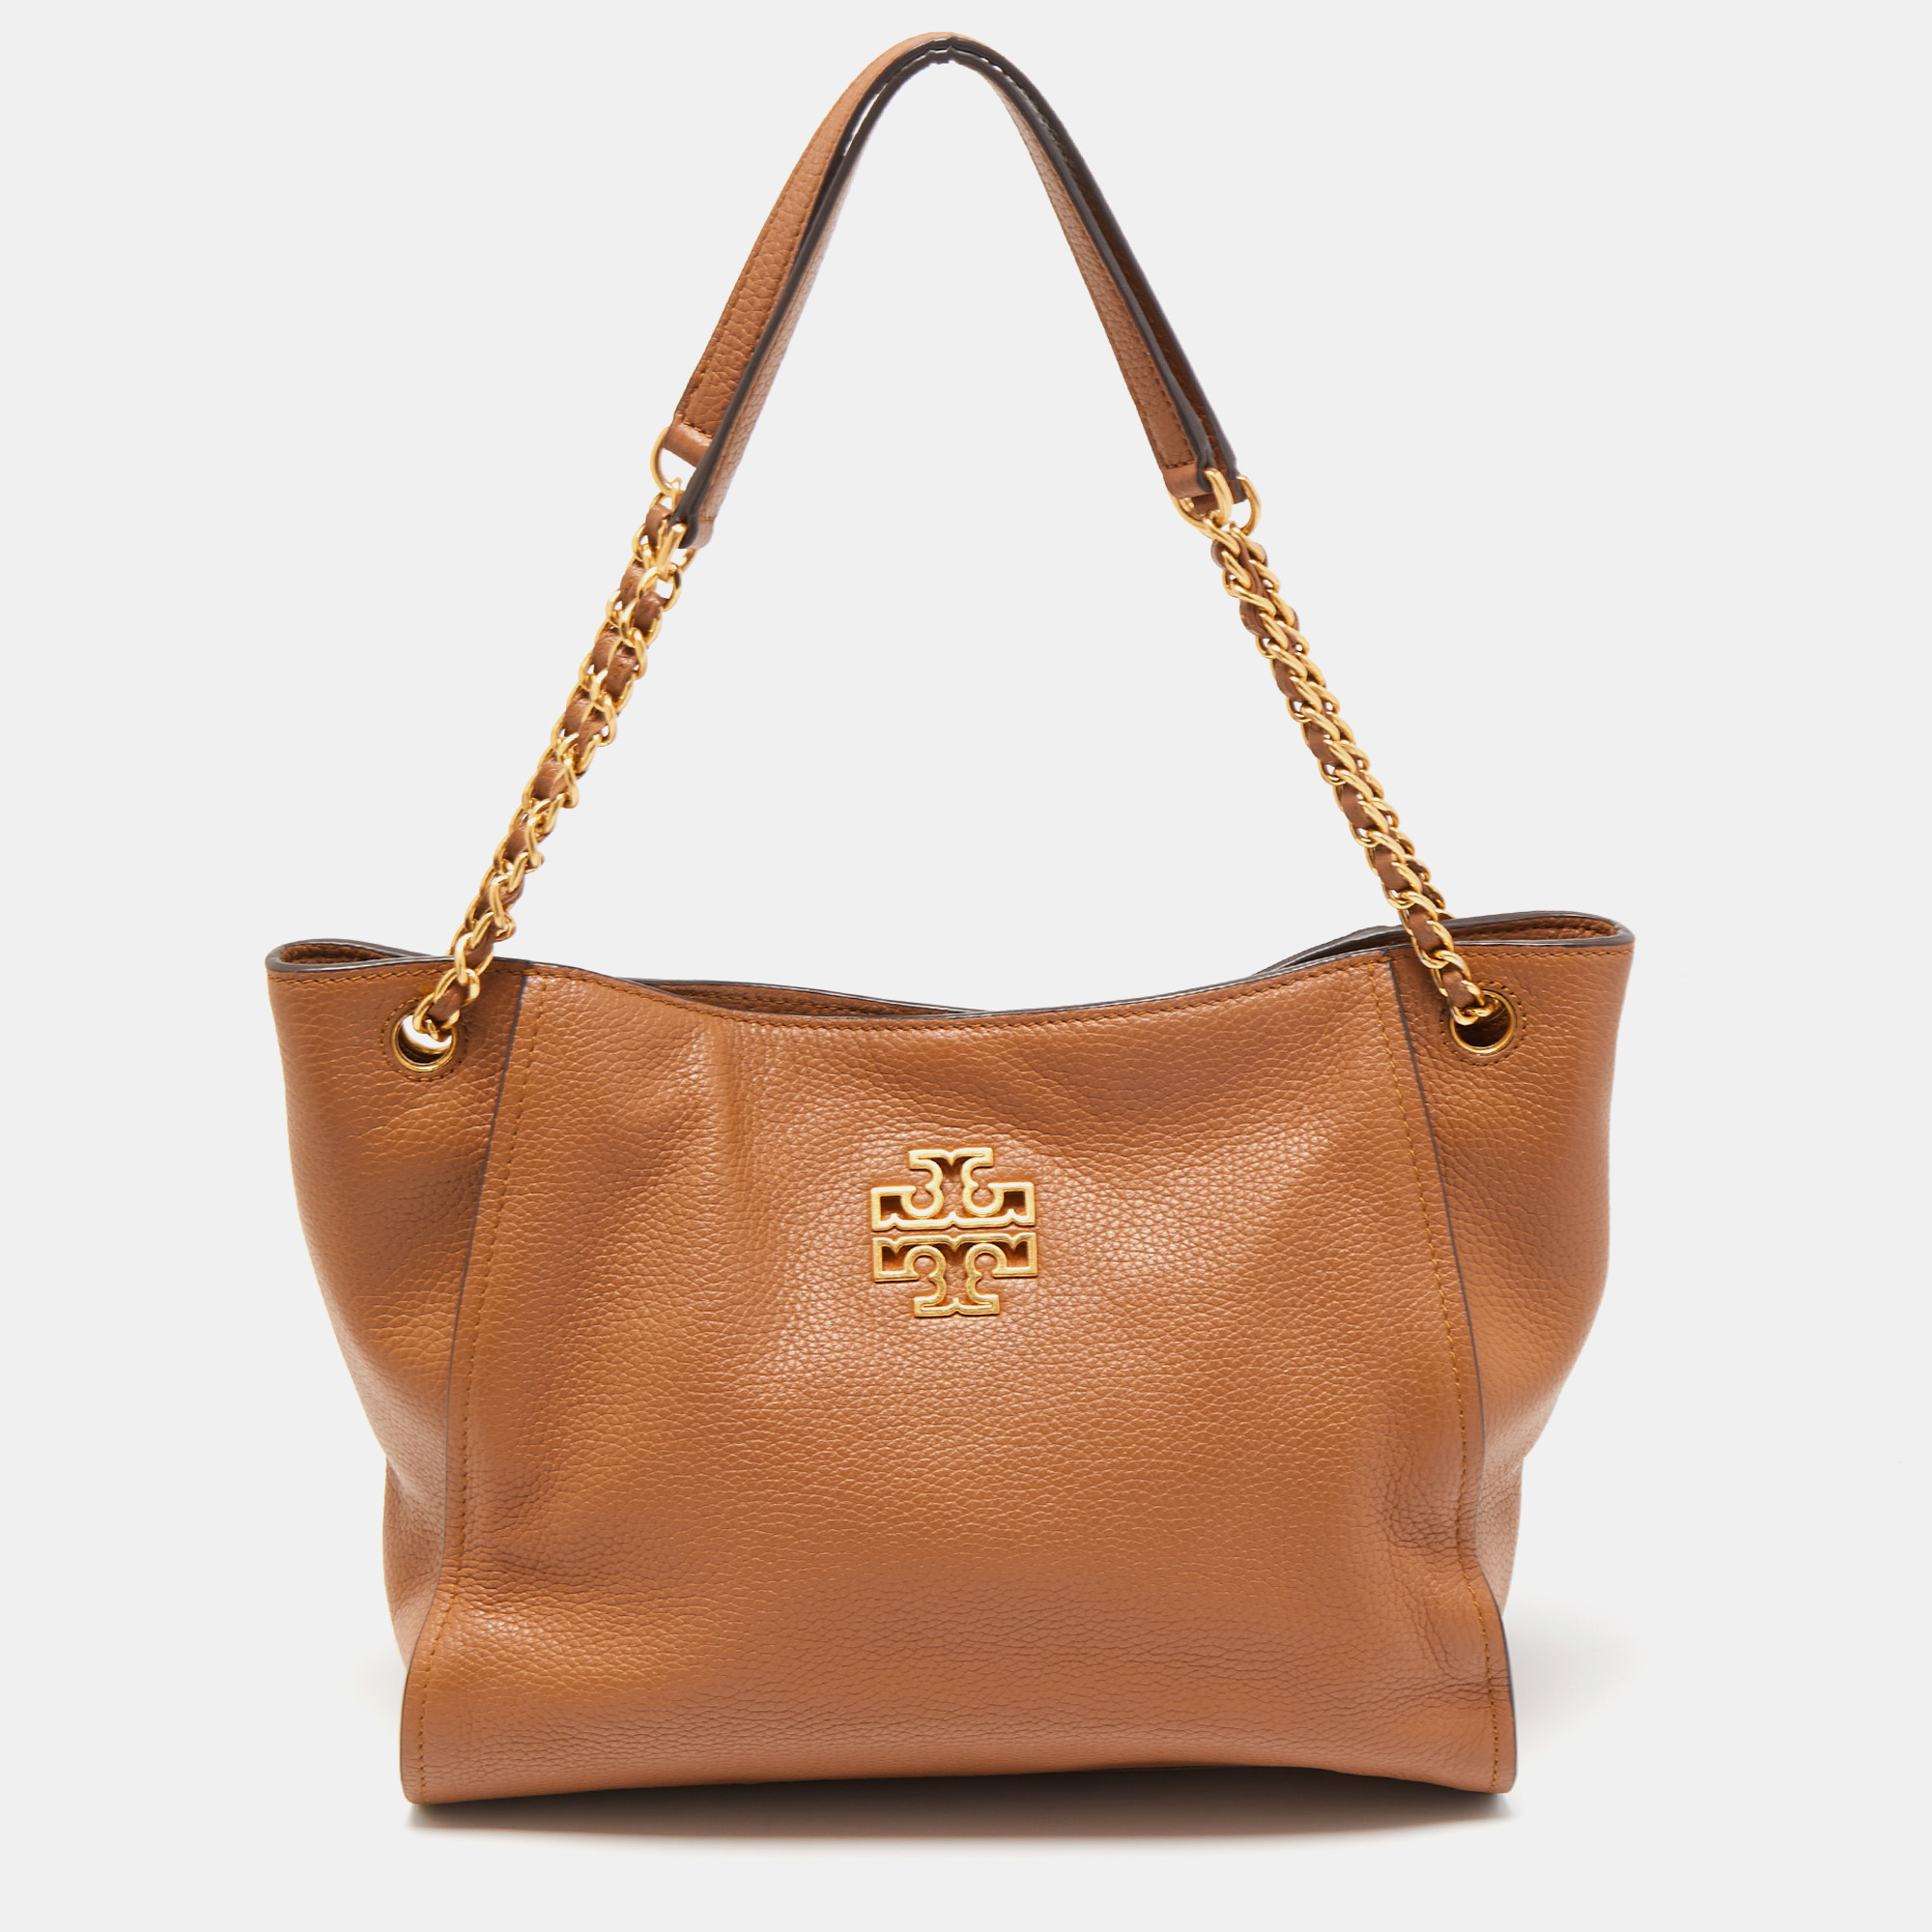 Tory Burch | Bags | Tory Burch Walker Canvas Satchel Almost Never Used |  Poshmark